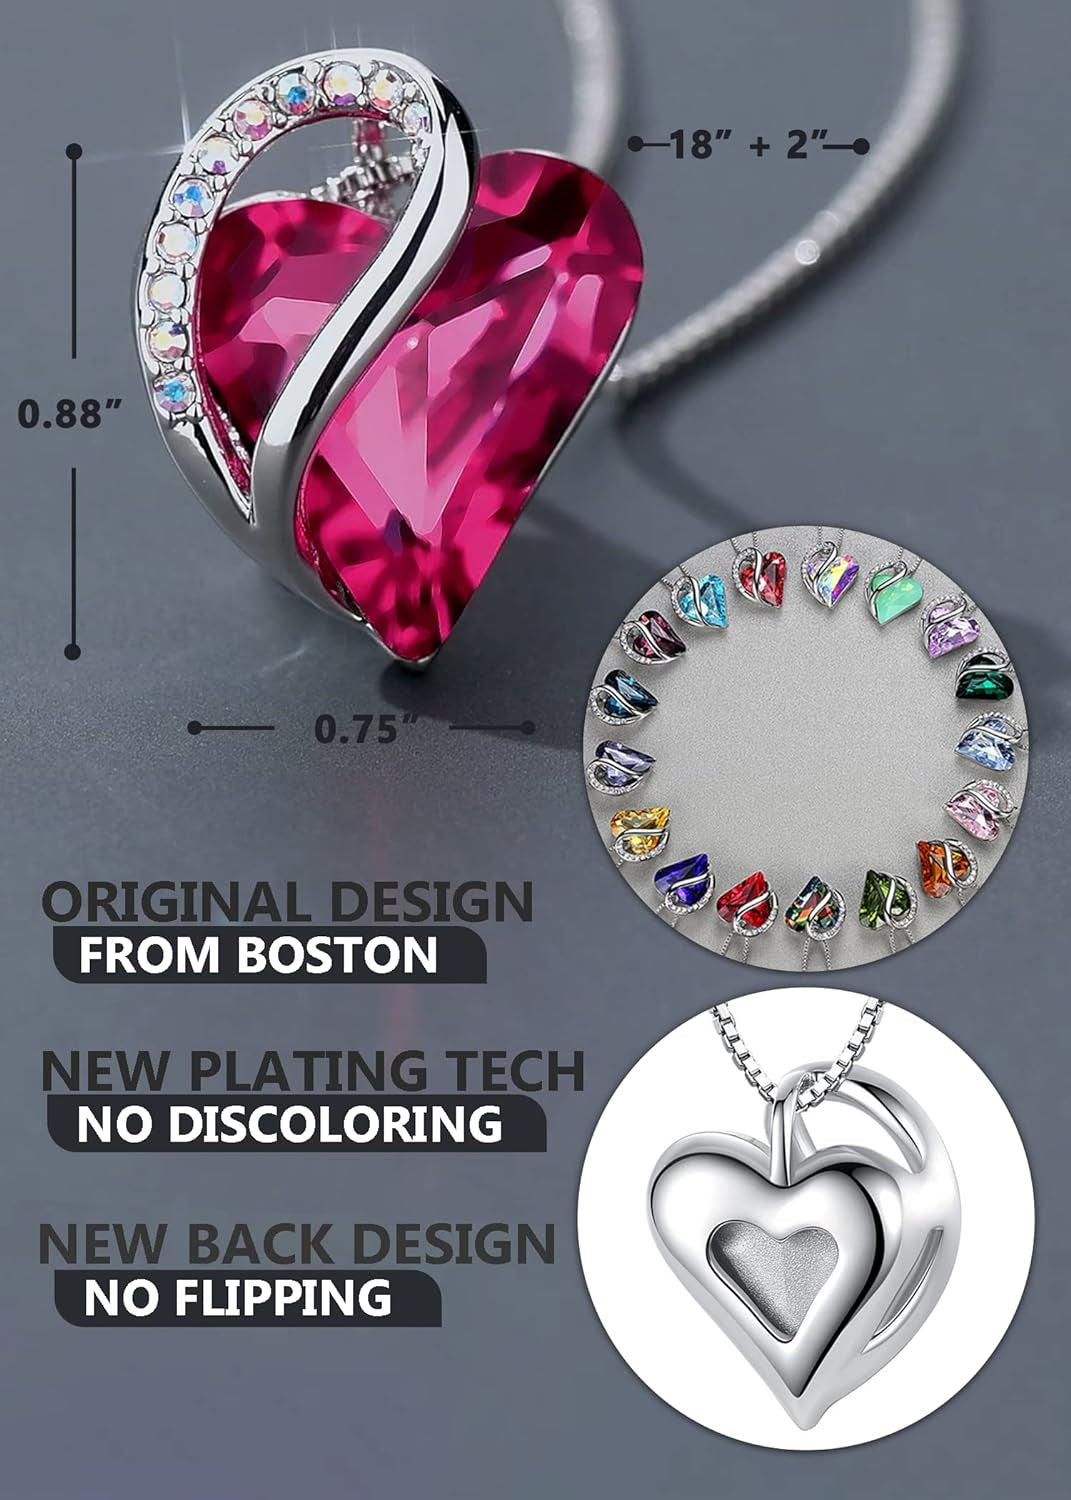 Eternal Love: Valentine's Day Gift Necklaces for Women - Infinity Love Heart Pendant with Birthstone Crystals, Silver Plated 18 + 2 Inch Chain, Jewelry Valentine's Gifts for Wife, Girlfriend